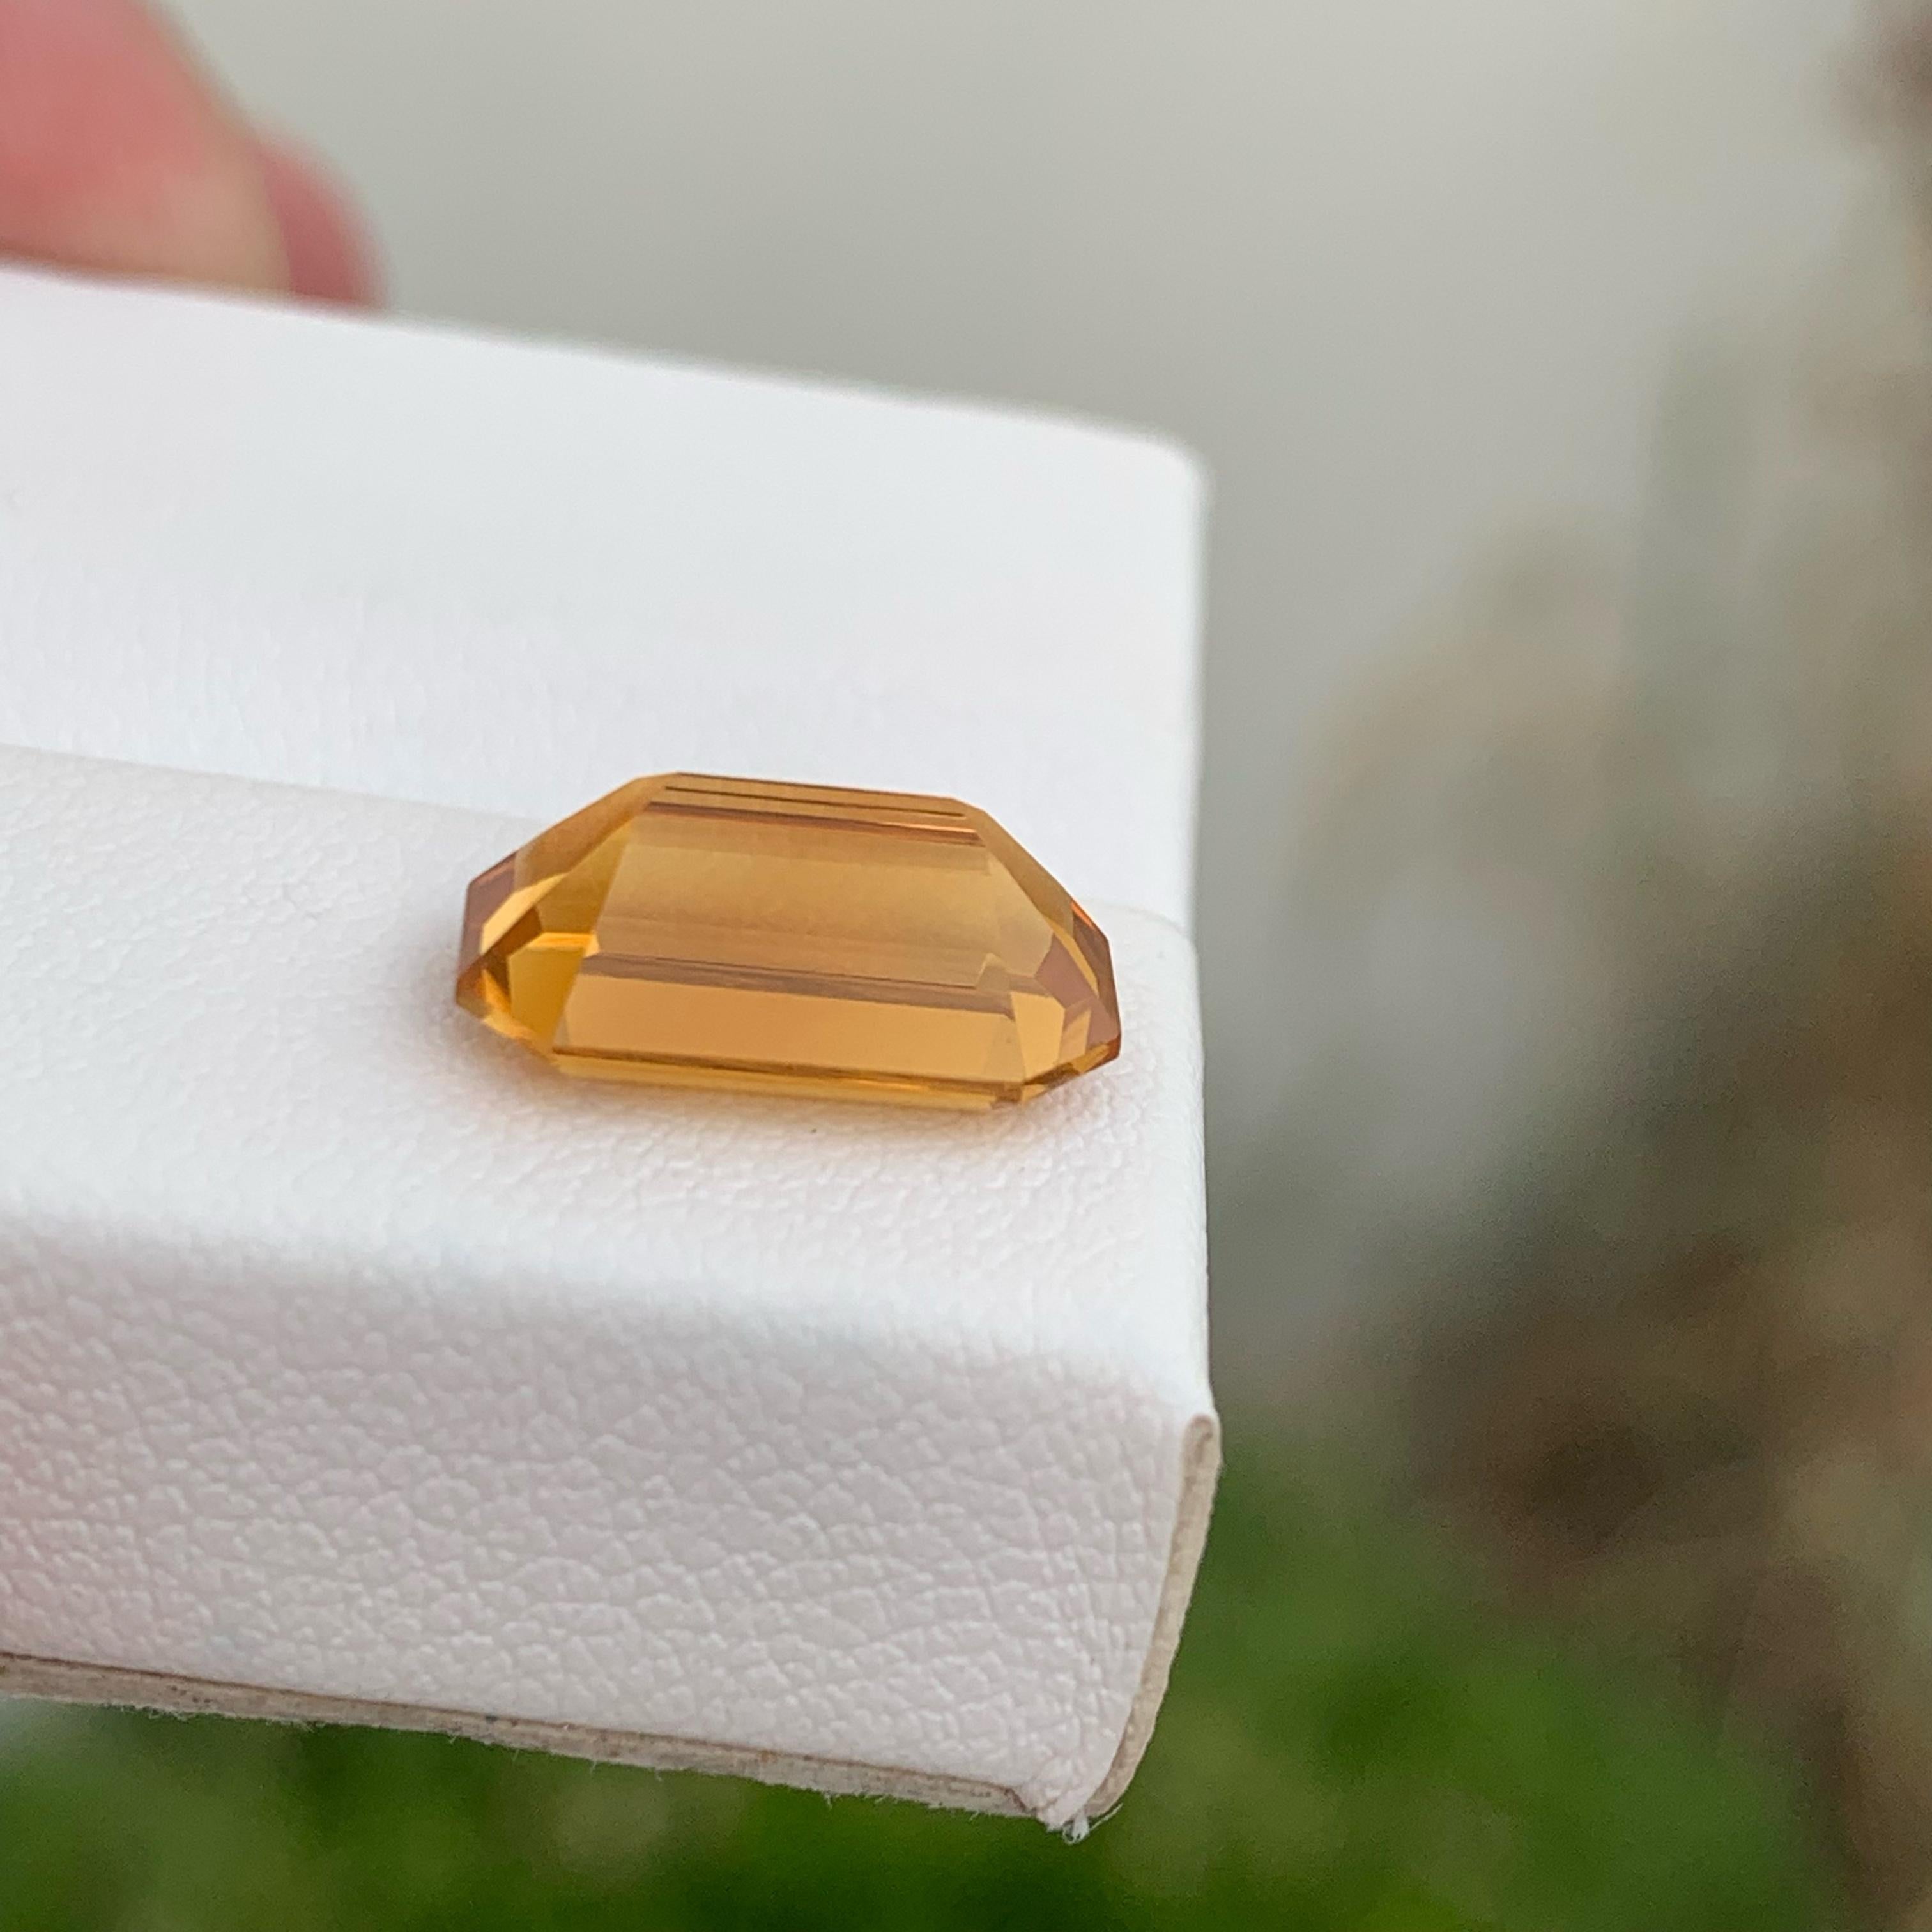 Weight 3.35 carats 
Dimensions 12.4 x 7.4 x 5.5 mm
Treatment None 
Origin Brazil 
Clarity Loupe Clean 
Shape Octagon 
Cut Emerald 



Elevate your jewelry collection with the warm and inviting beauty of this Harvest Orange Citrine. This natural